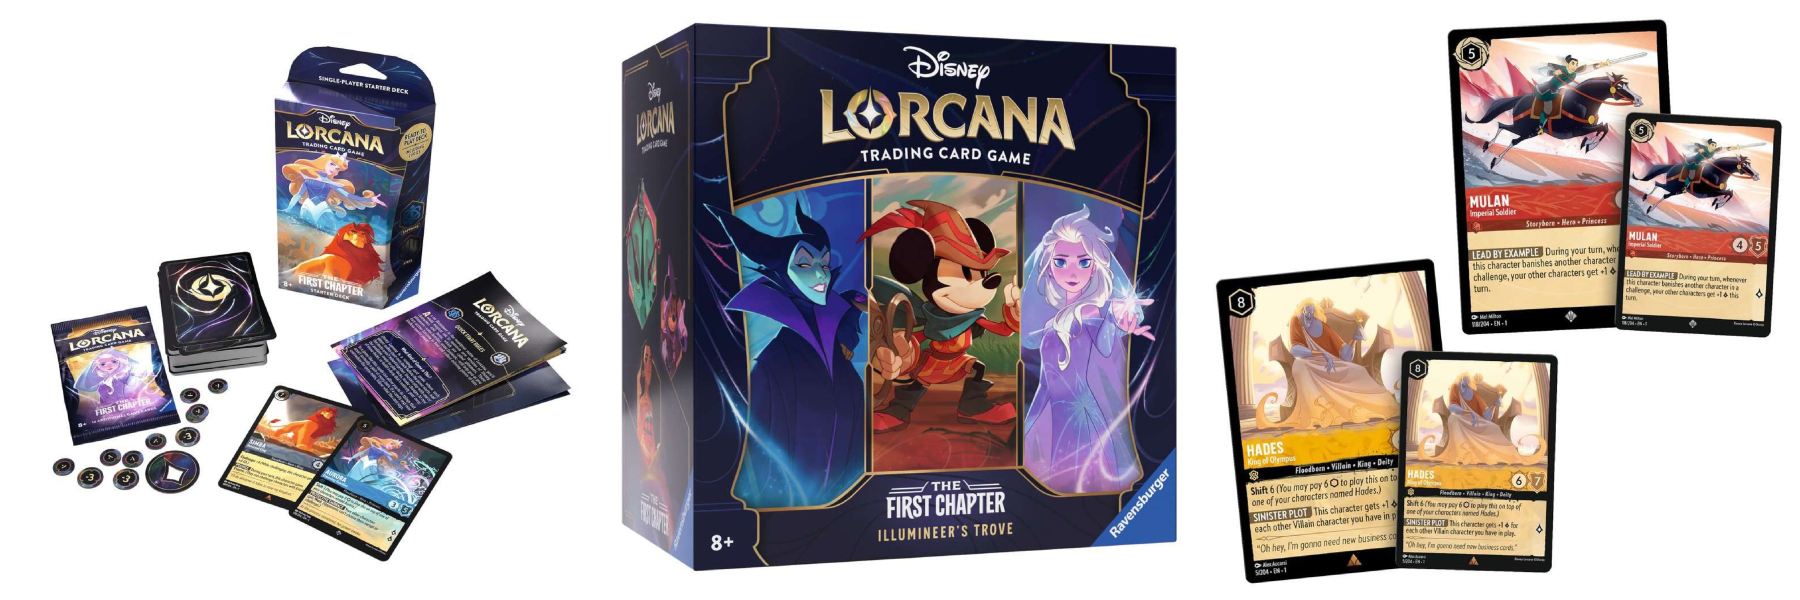 Tabletop Game Review – Disney Lorcana